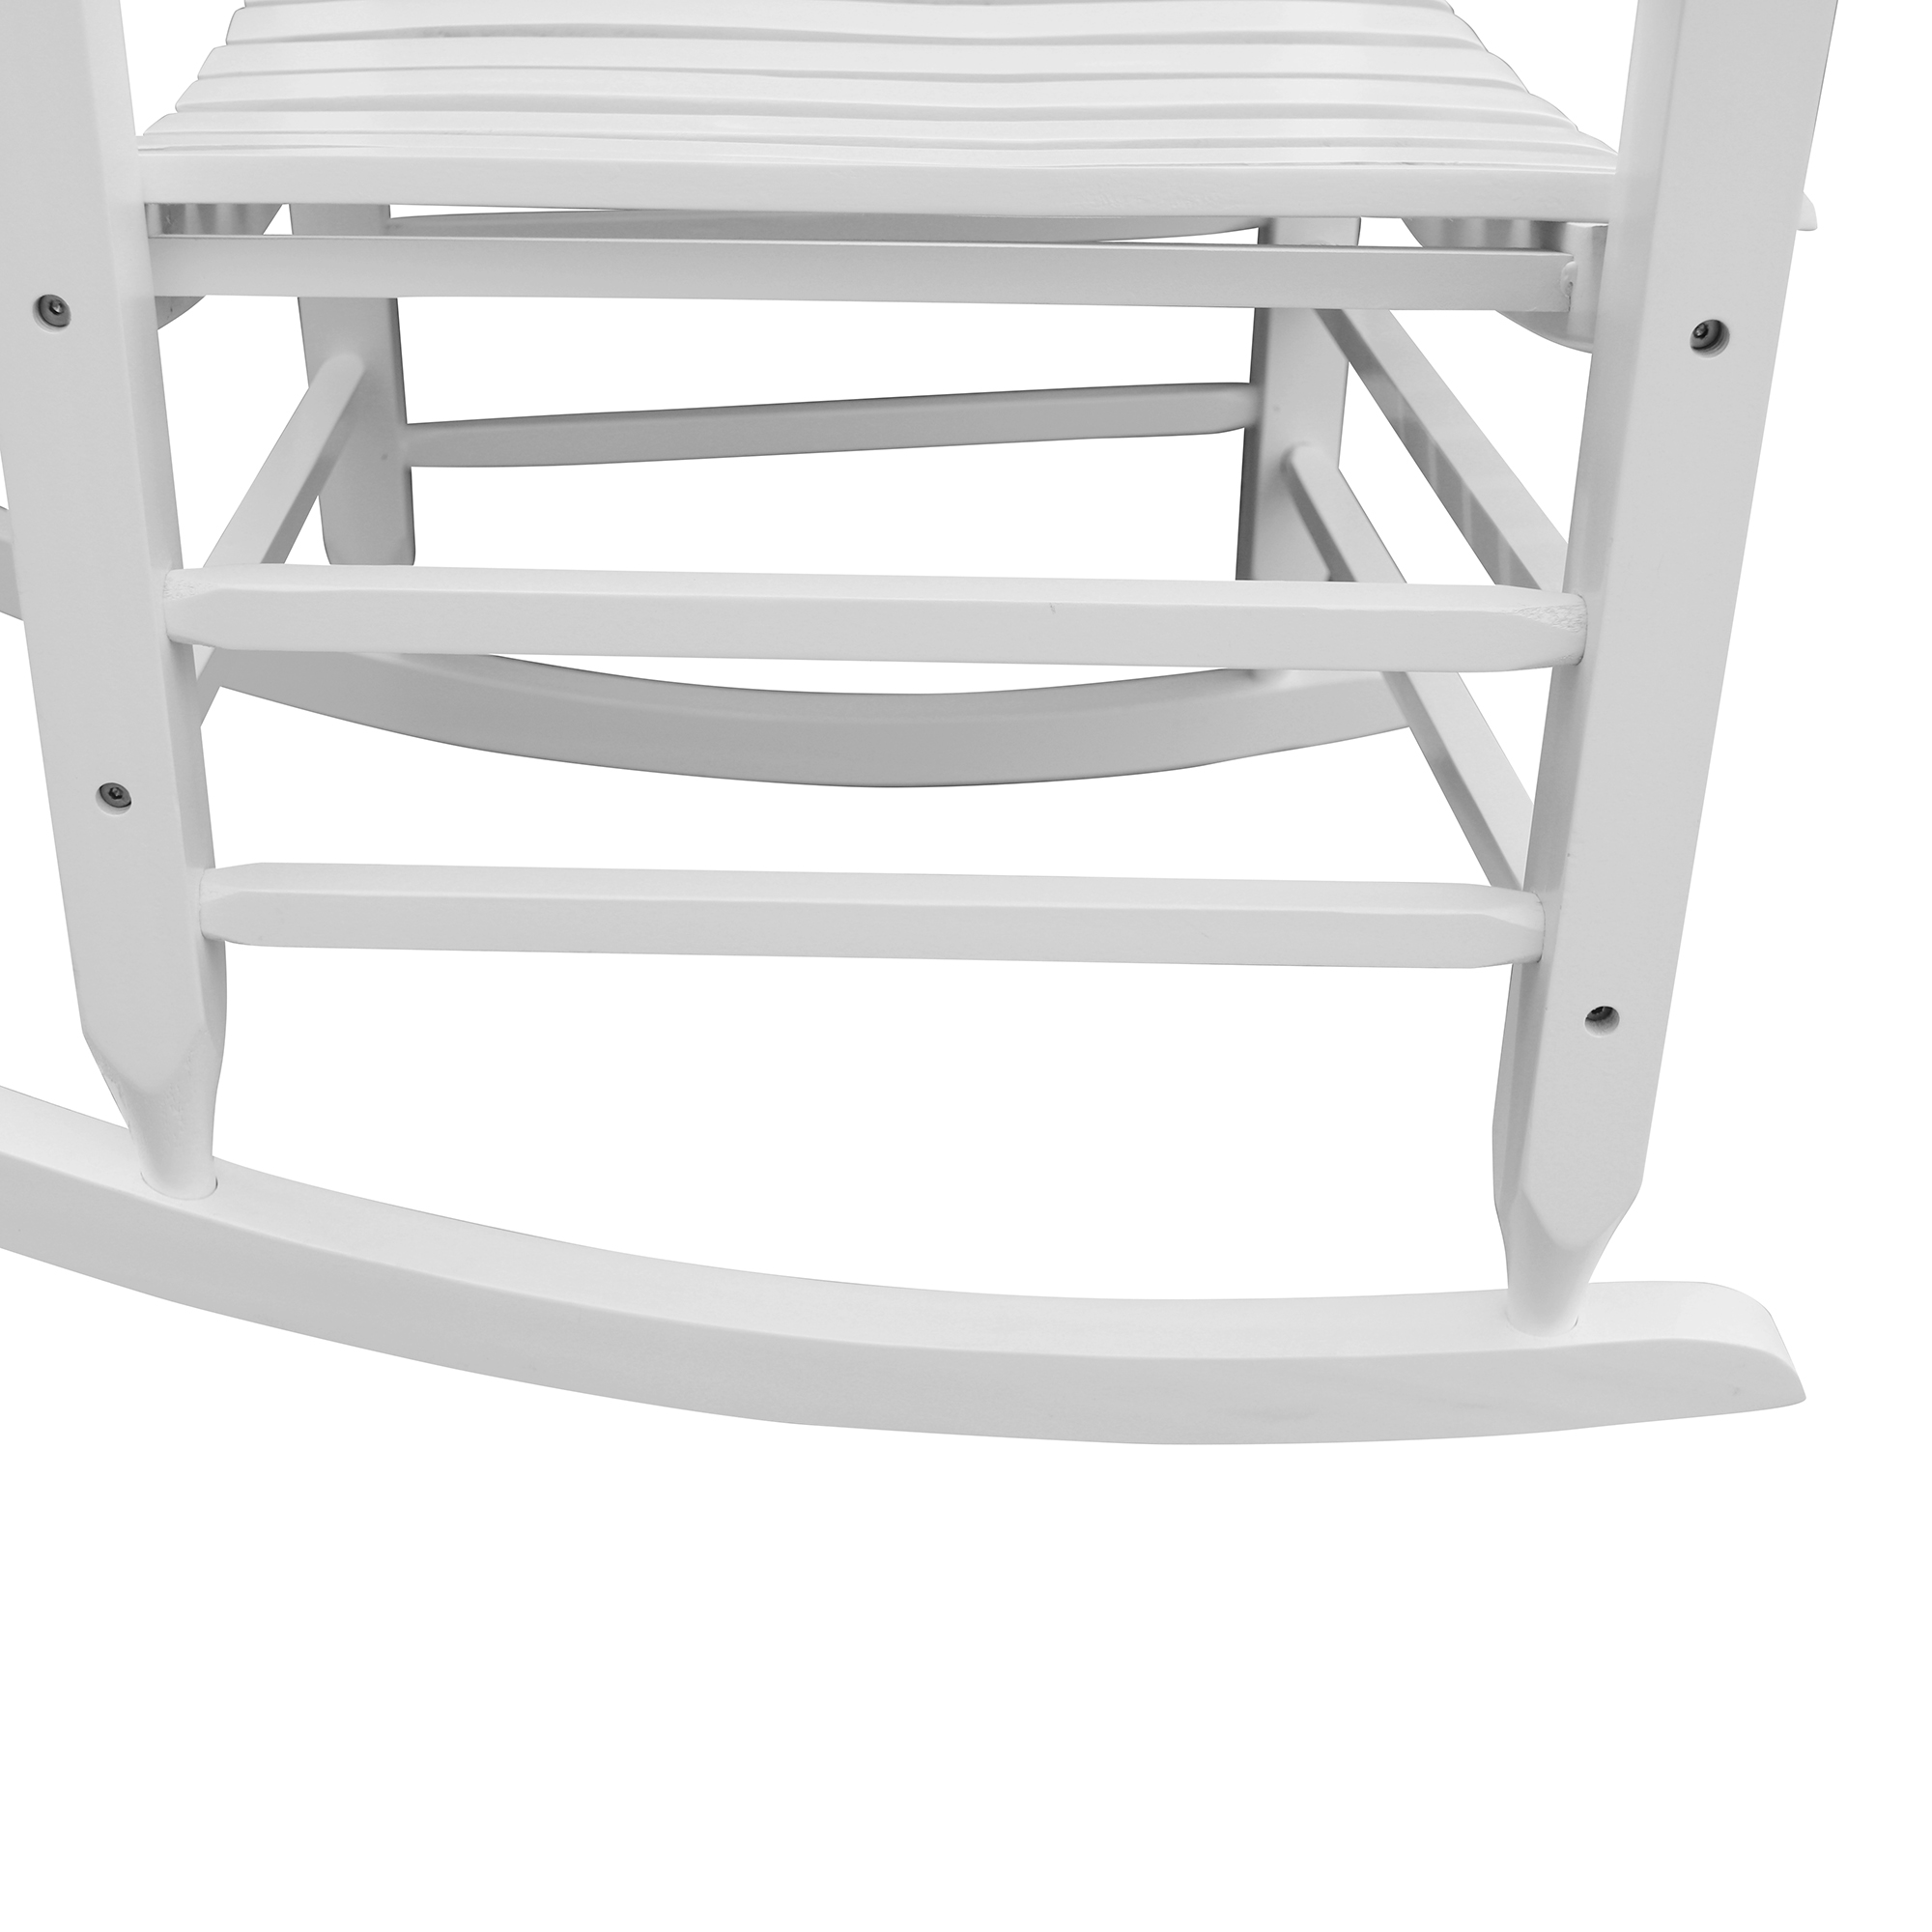 Rocking Chair for Outdoor, Wooden Patio Porch Rocker Chair with Back Support, Ergonomic Wooden Rocking Chair for Patio Porch Backyard, Rocking Bistro Chair Patio Chairs, Max 280lbs, White, A1602 - image 3 of 7